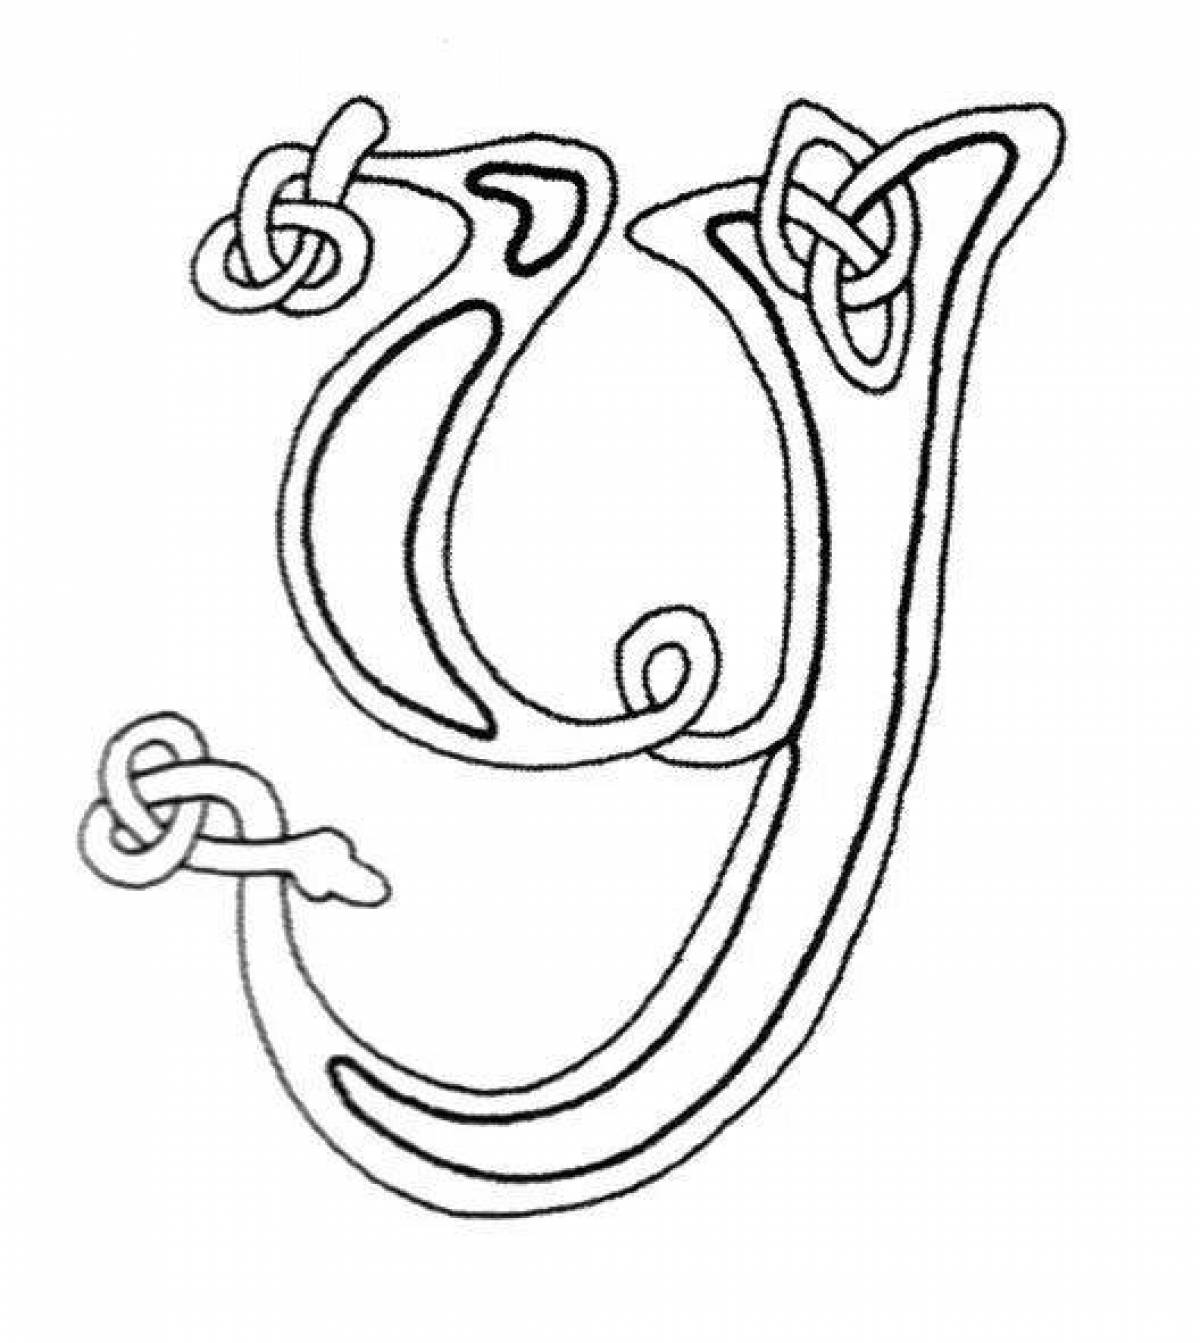 Fancy coloring page initial letter